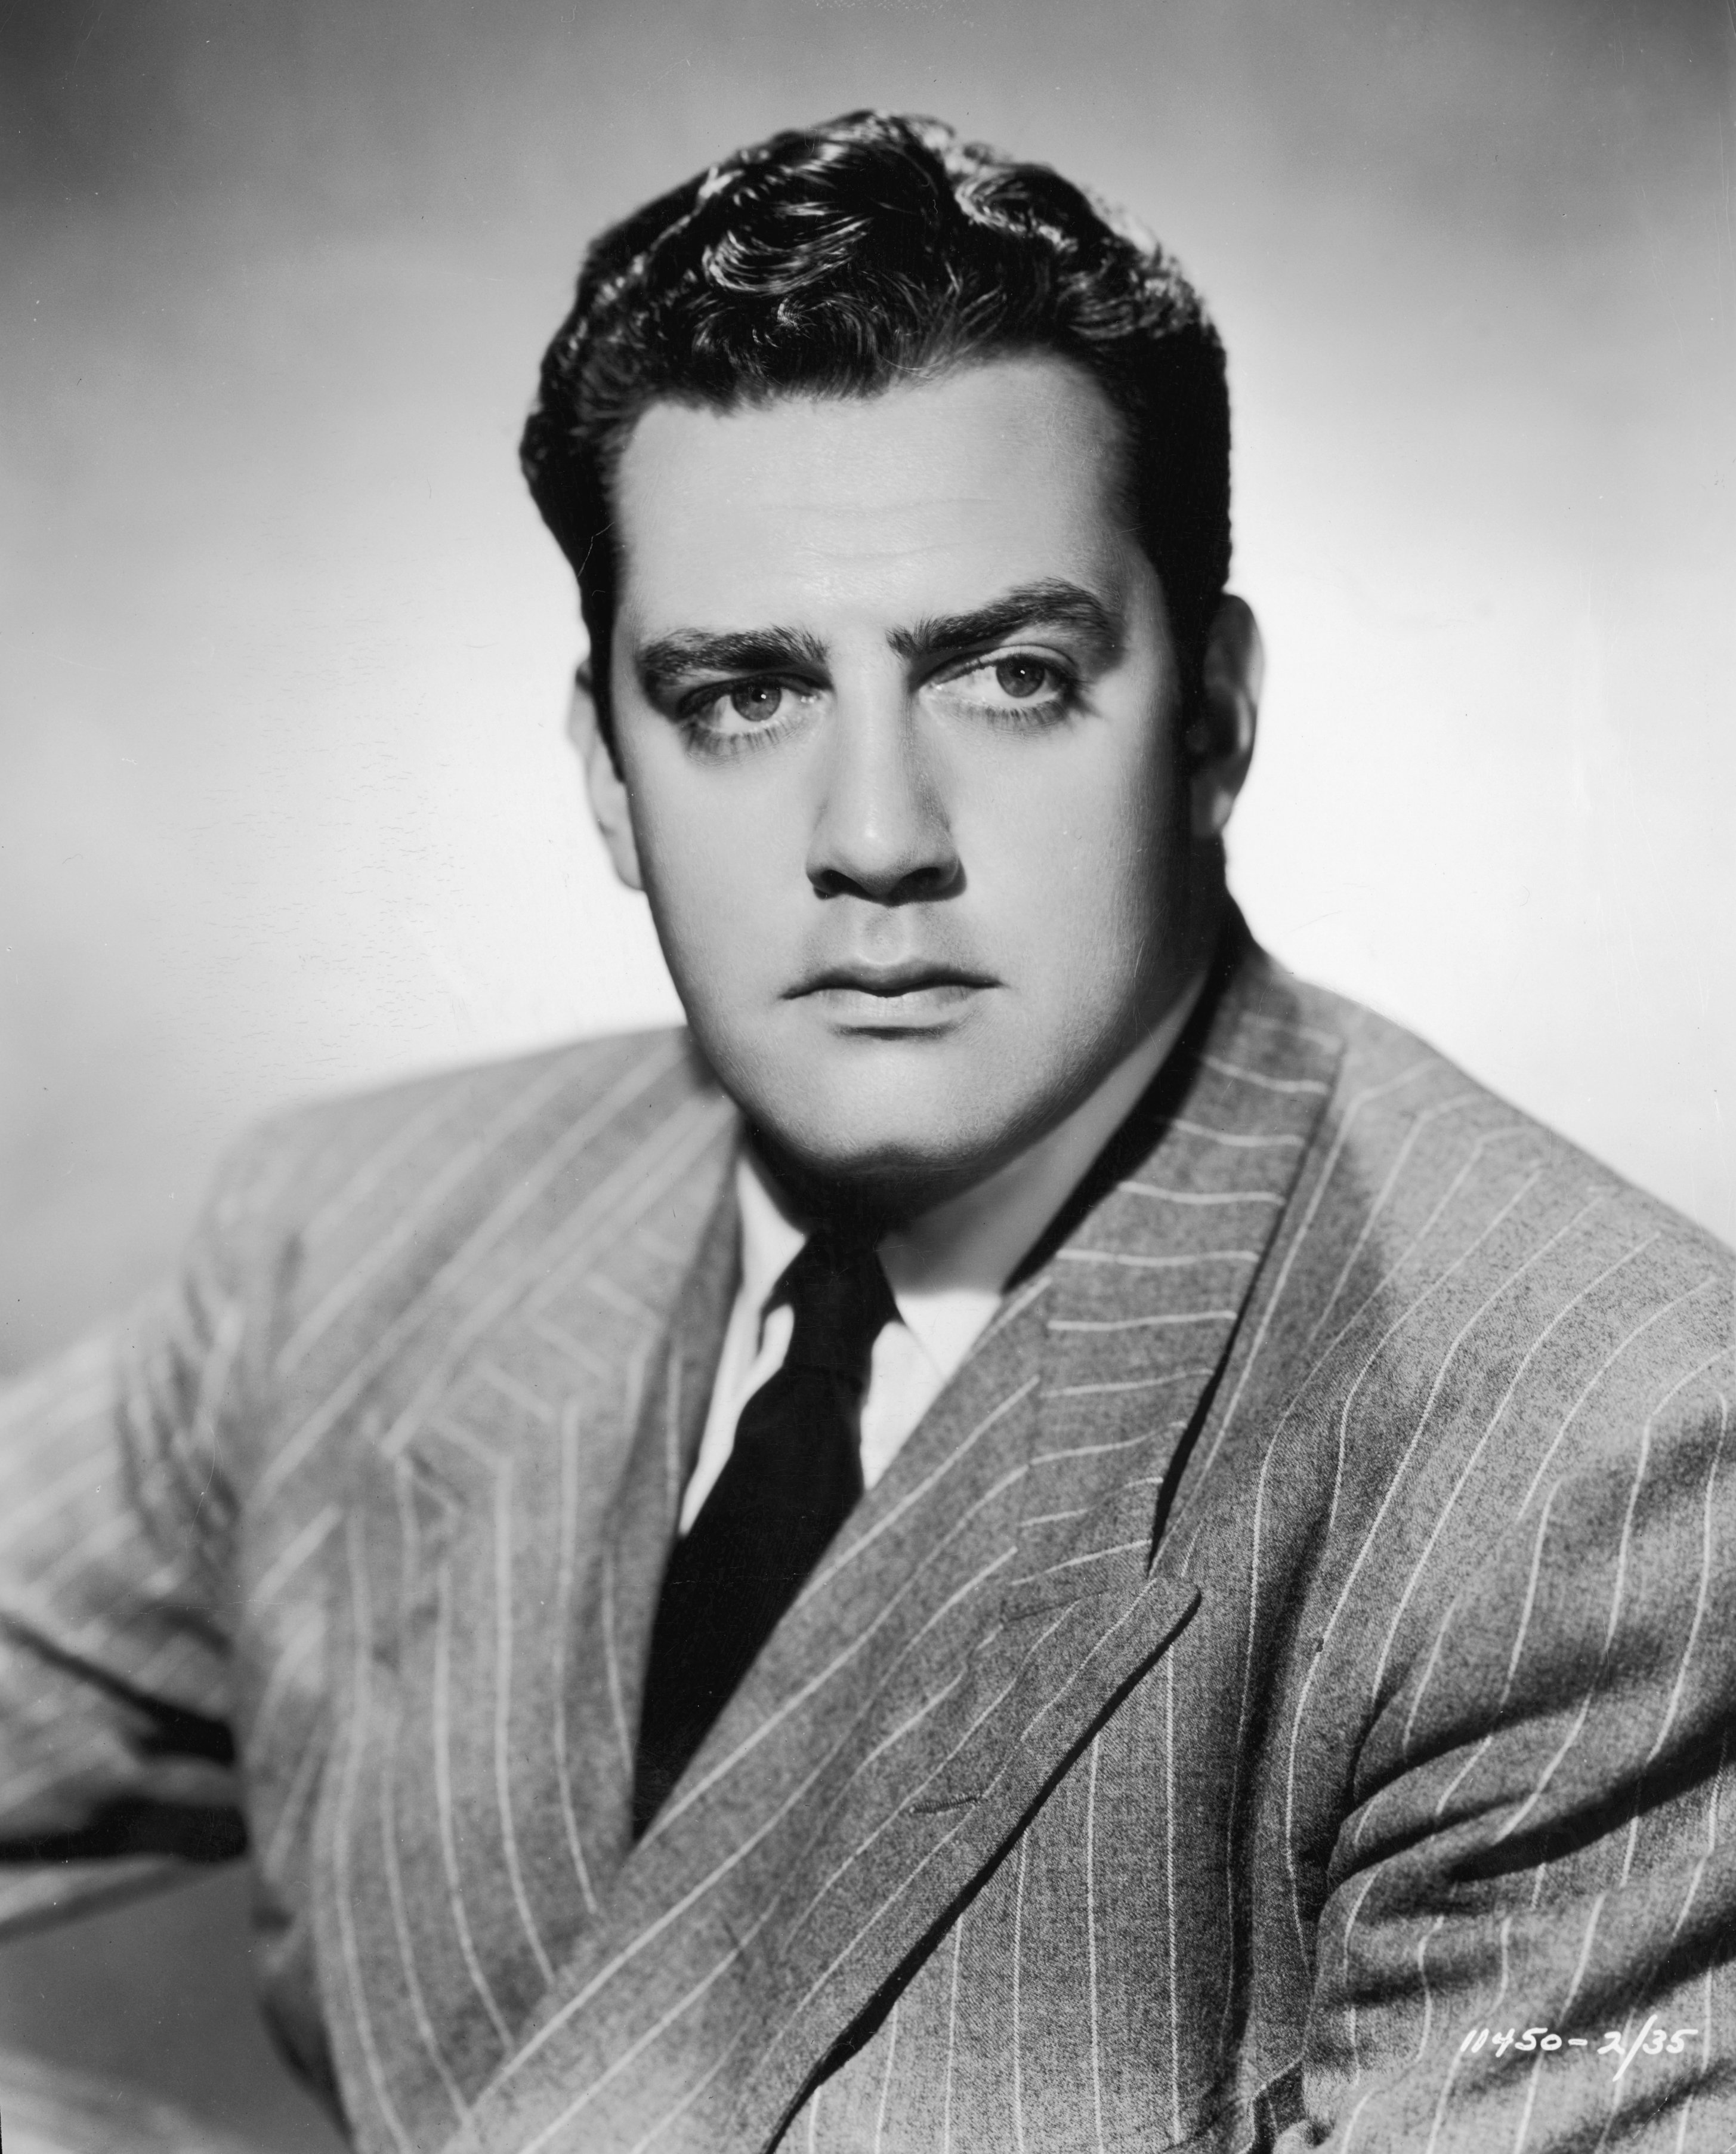 Raymond Burr photographed wearing a pinstriped suit in a promotional headshot for the movie, "Bride of Vengeance" on January 1, 1948 ┃Source: Getty Images